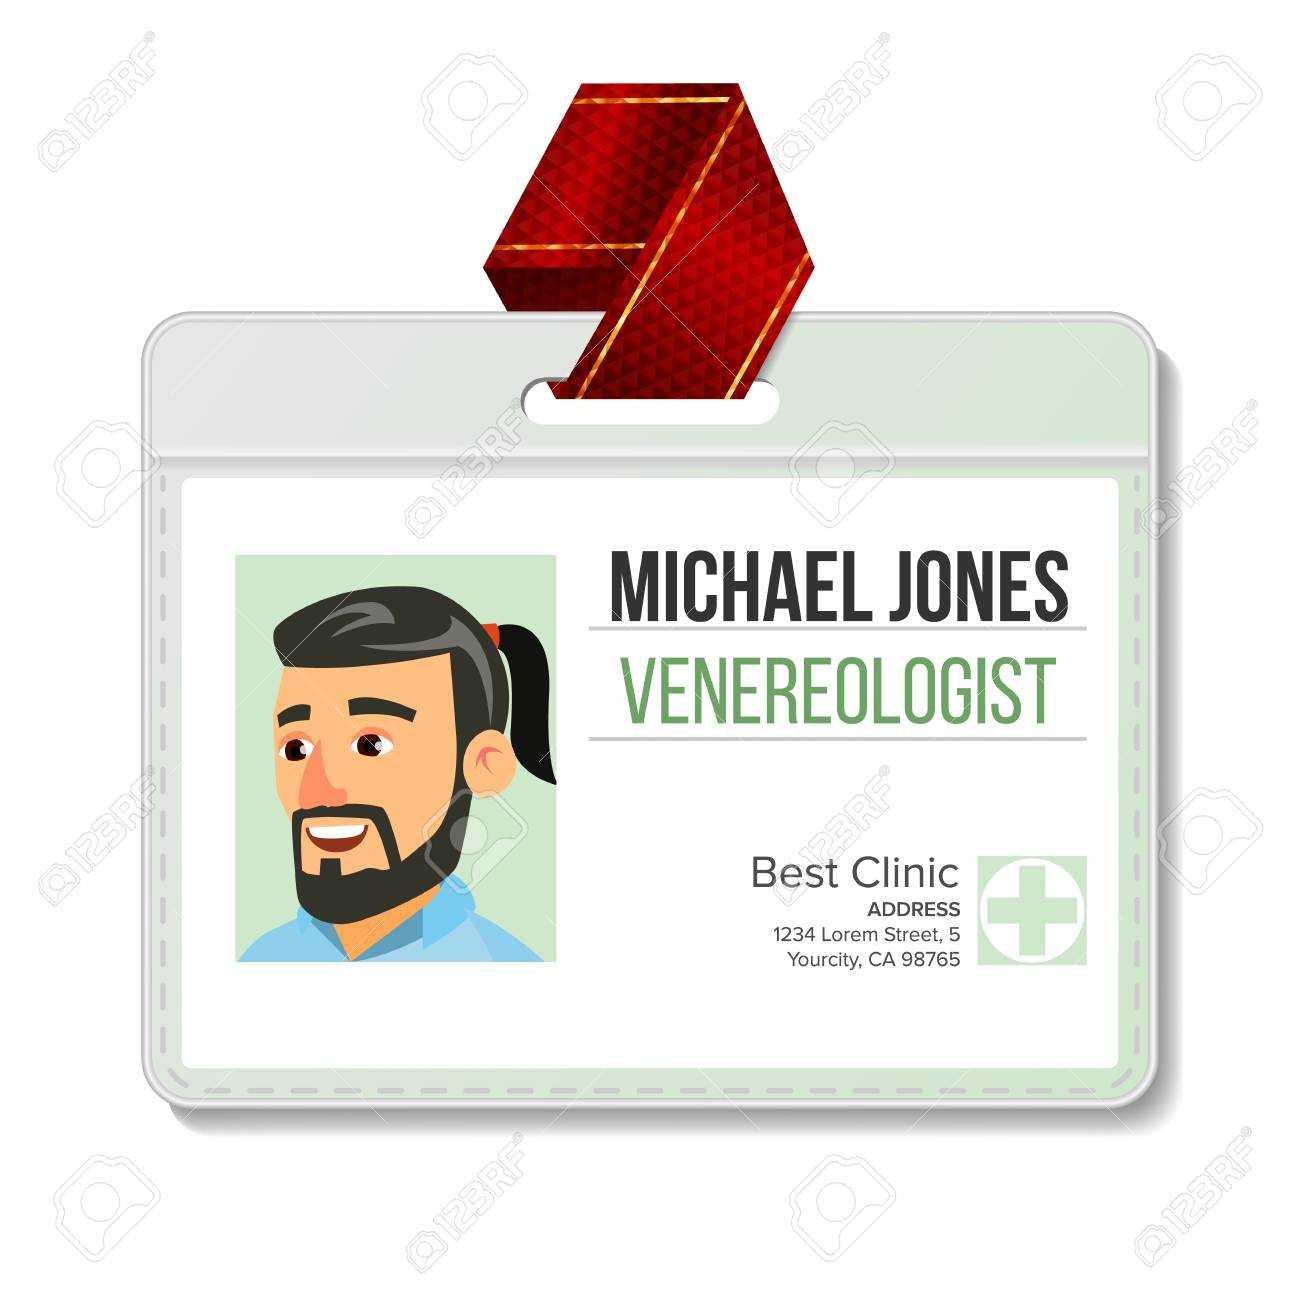 Venereologist Identification Badge Vector. Man. Id Card Template Within Hospital Id Card Template